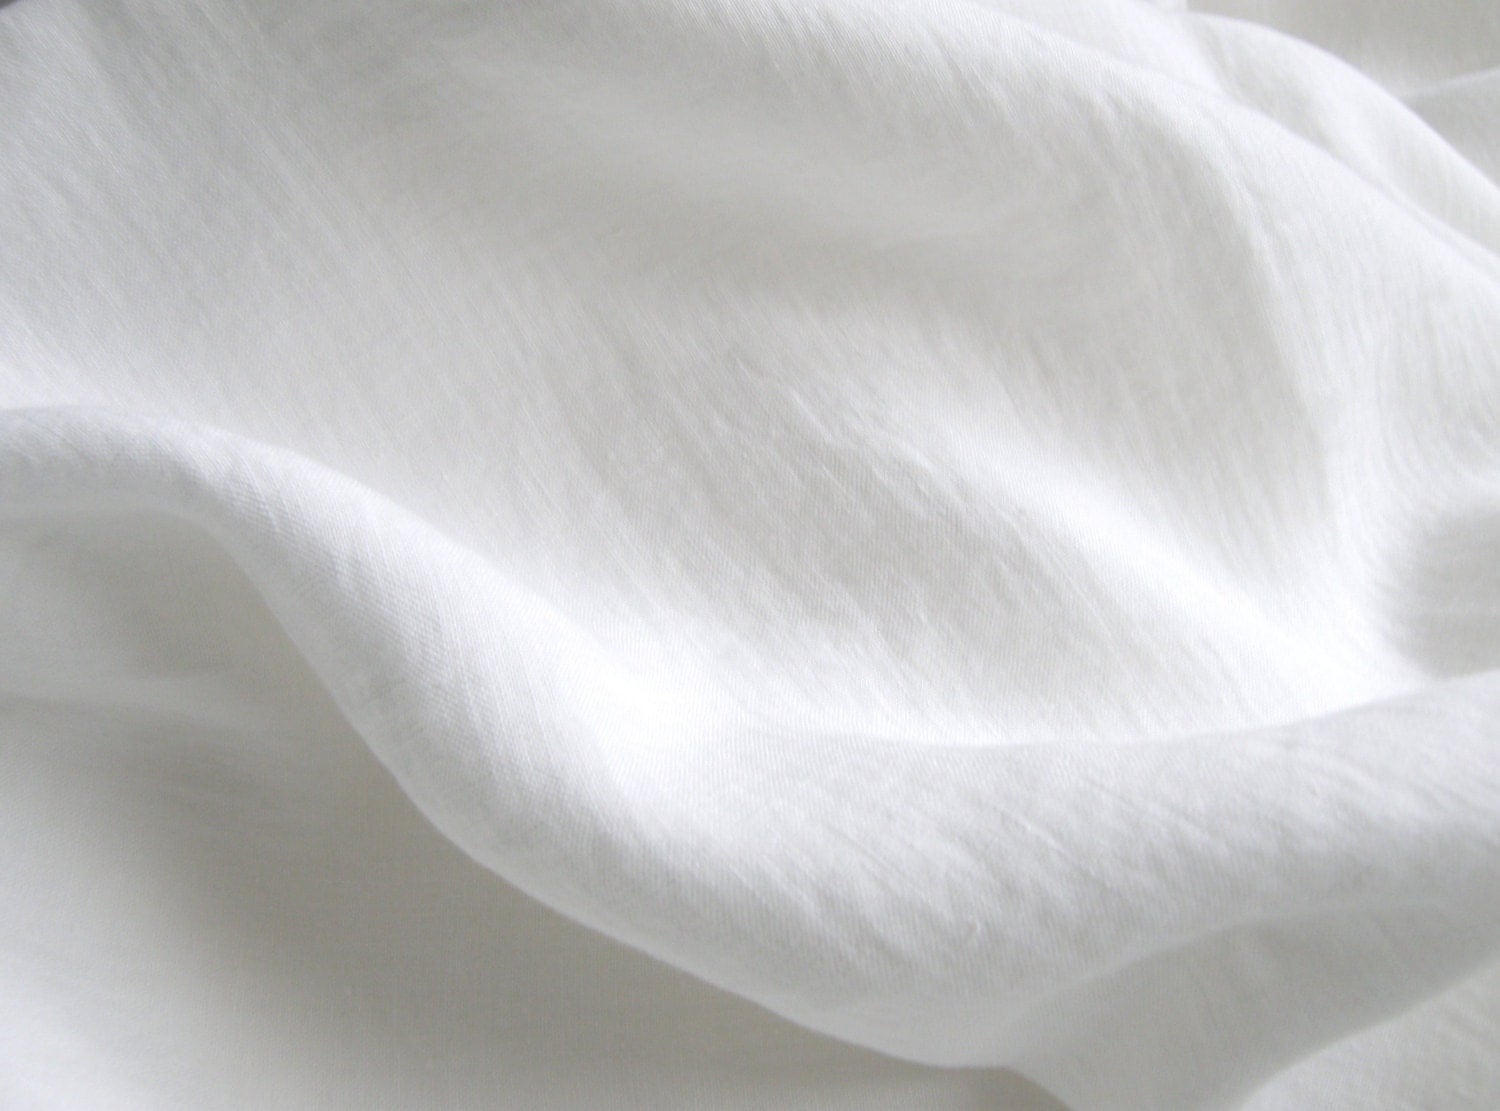 Pure white linen fabric prewashed and soft 1 yard
